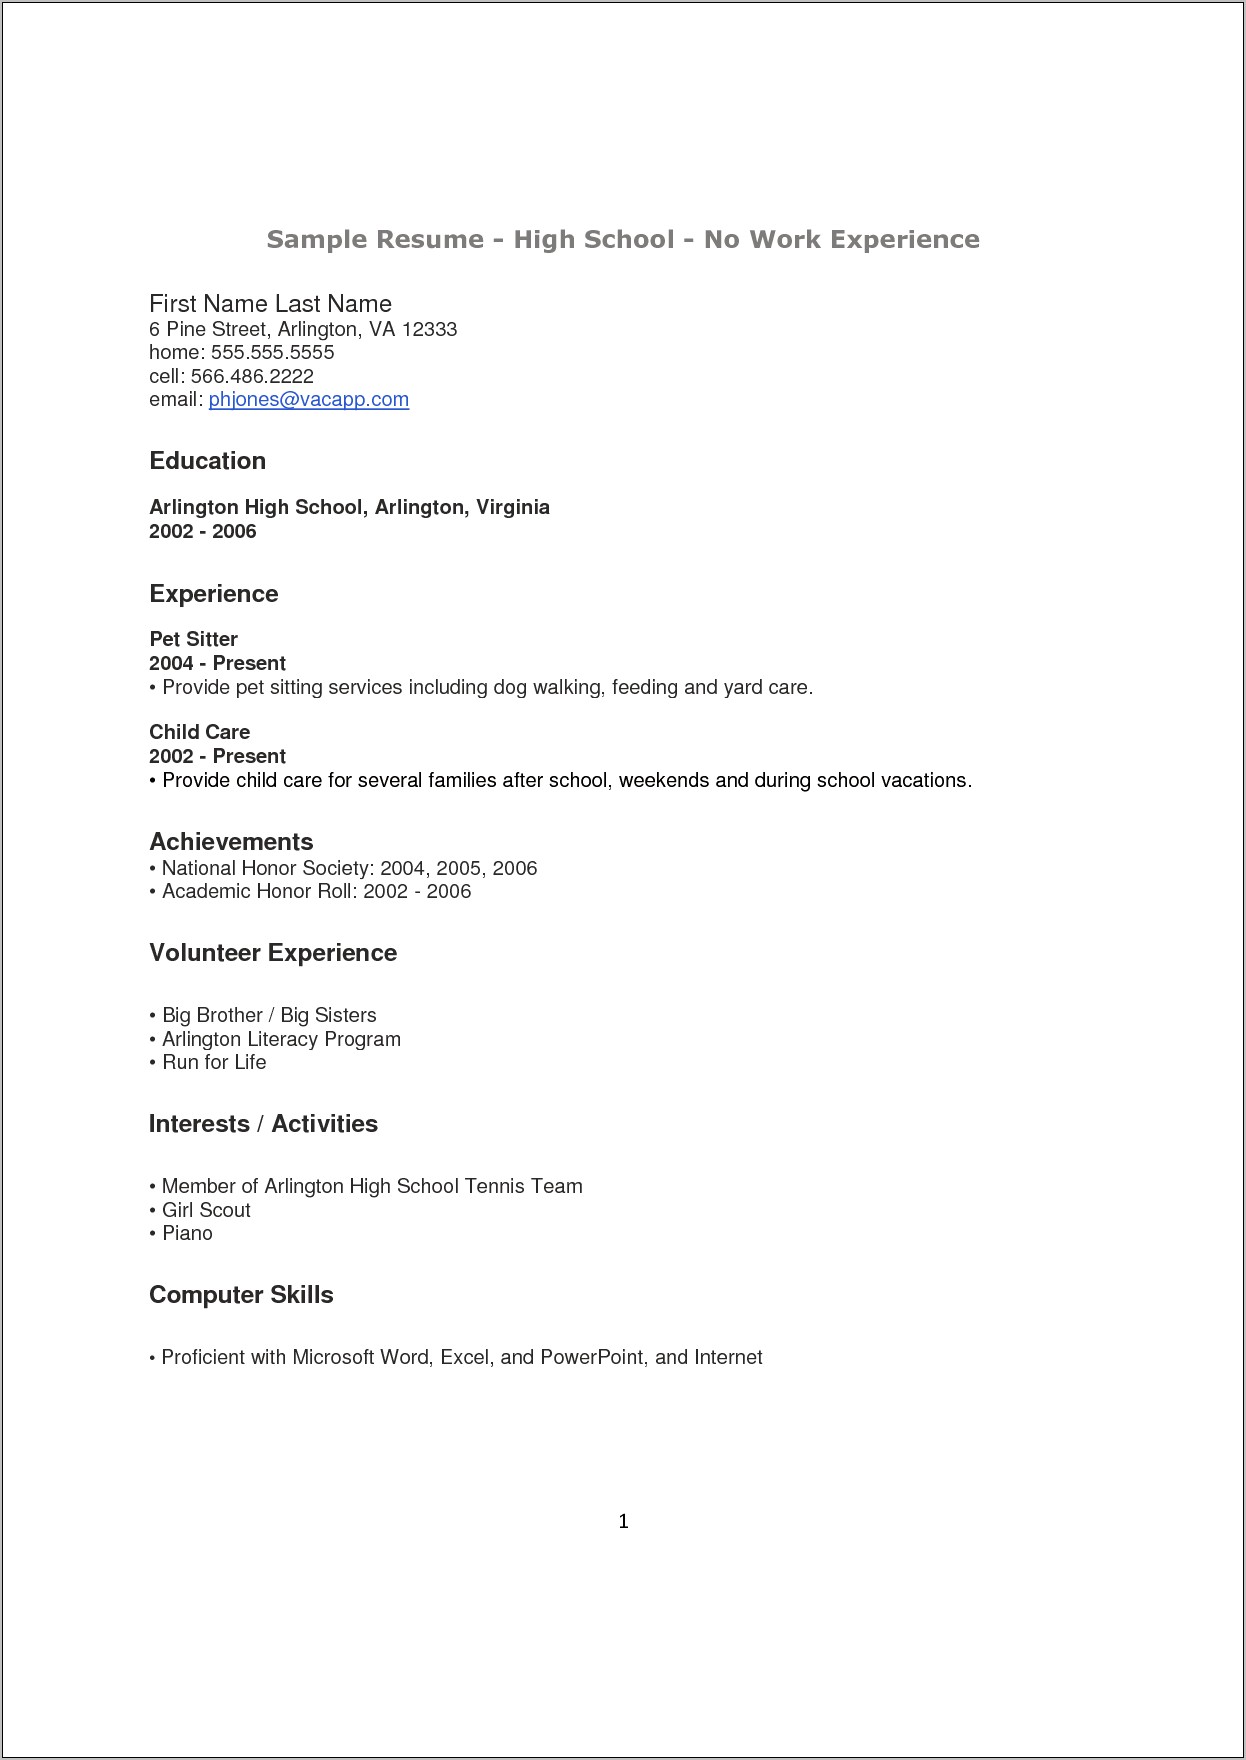 Resume For Lifeguard With No Experience